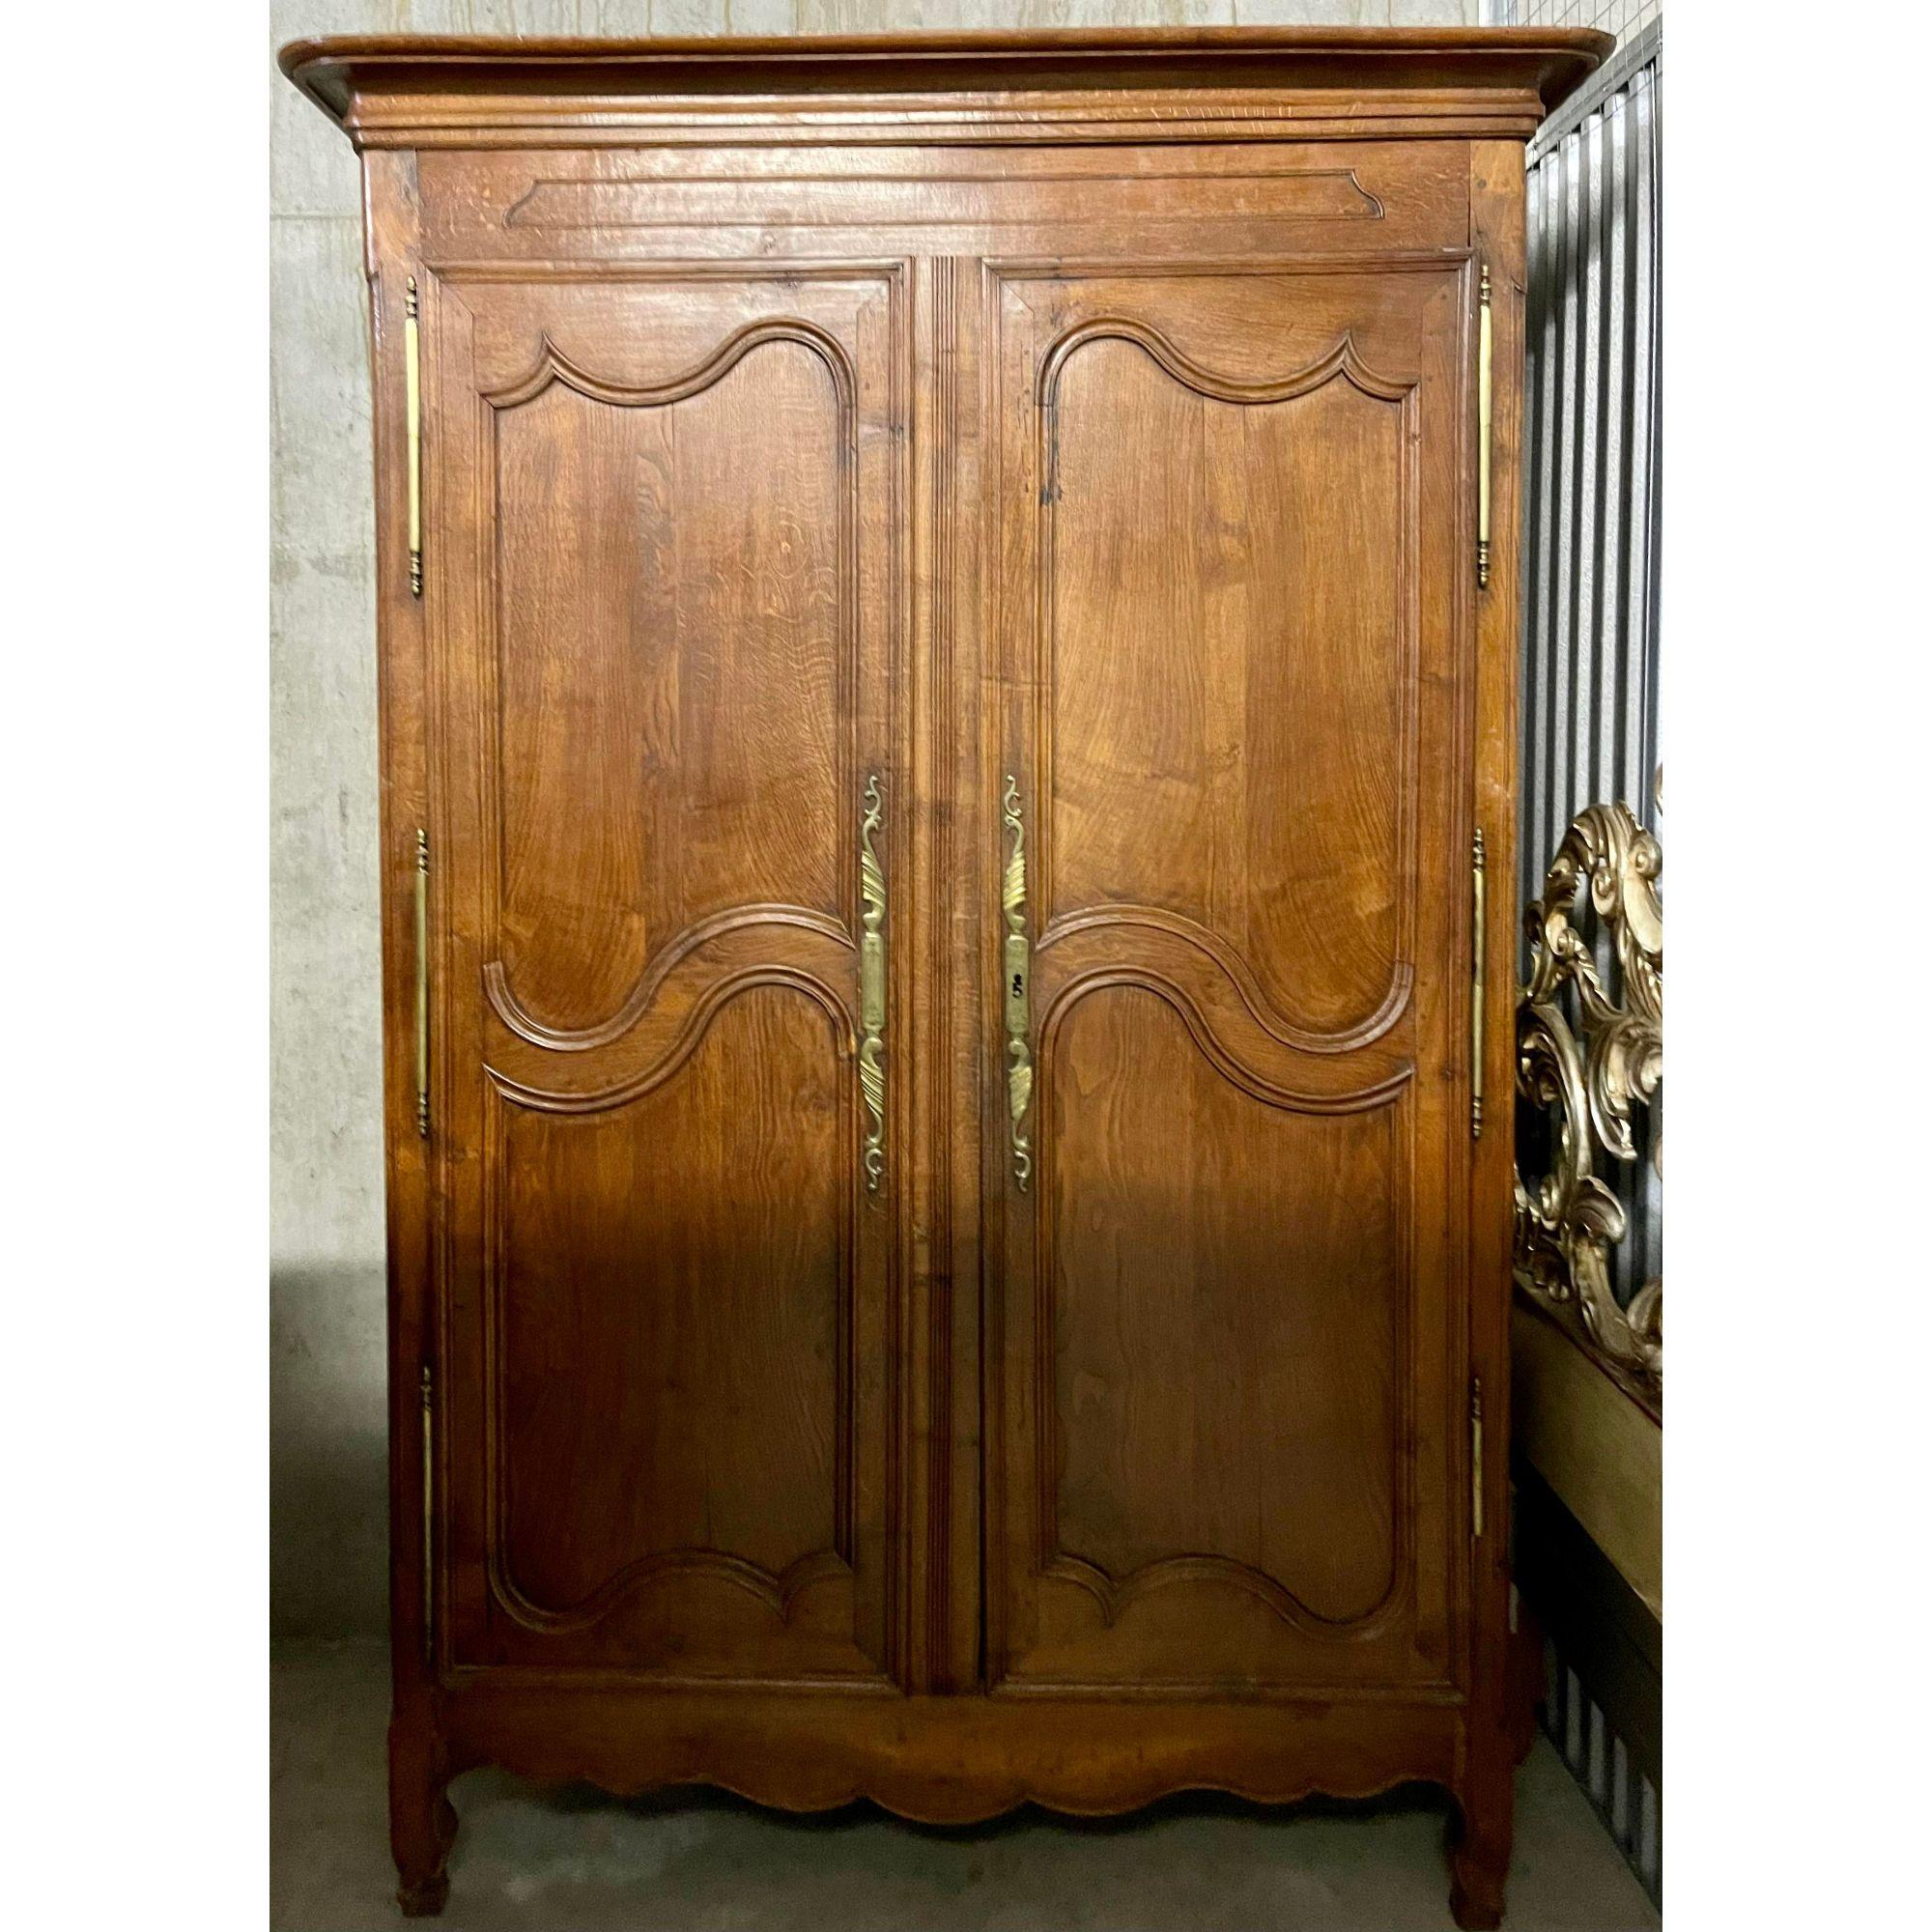 French Provincial 18th Century French Country Armoire Linen Press Wardrobe Cabinet